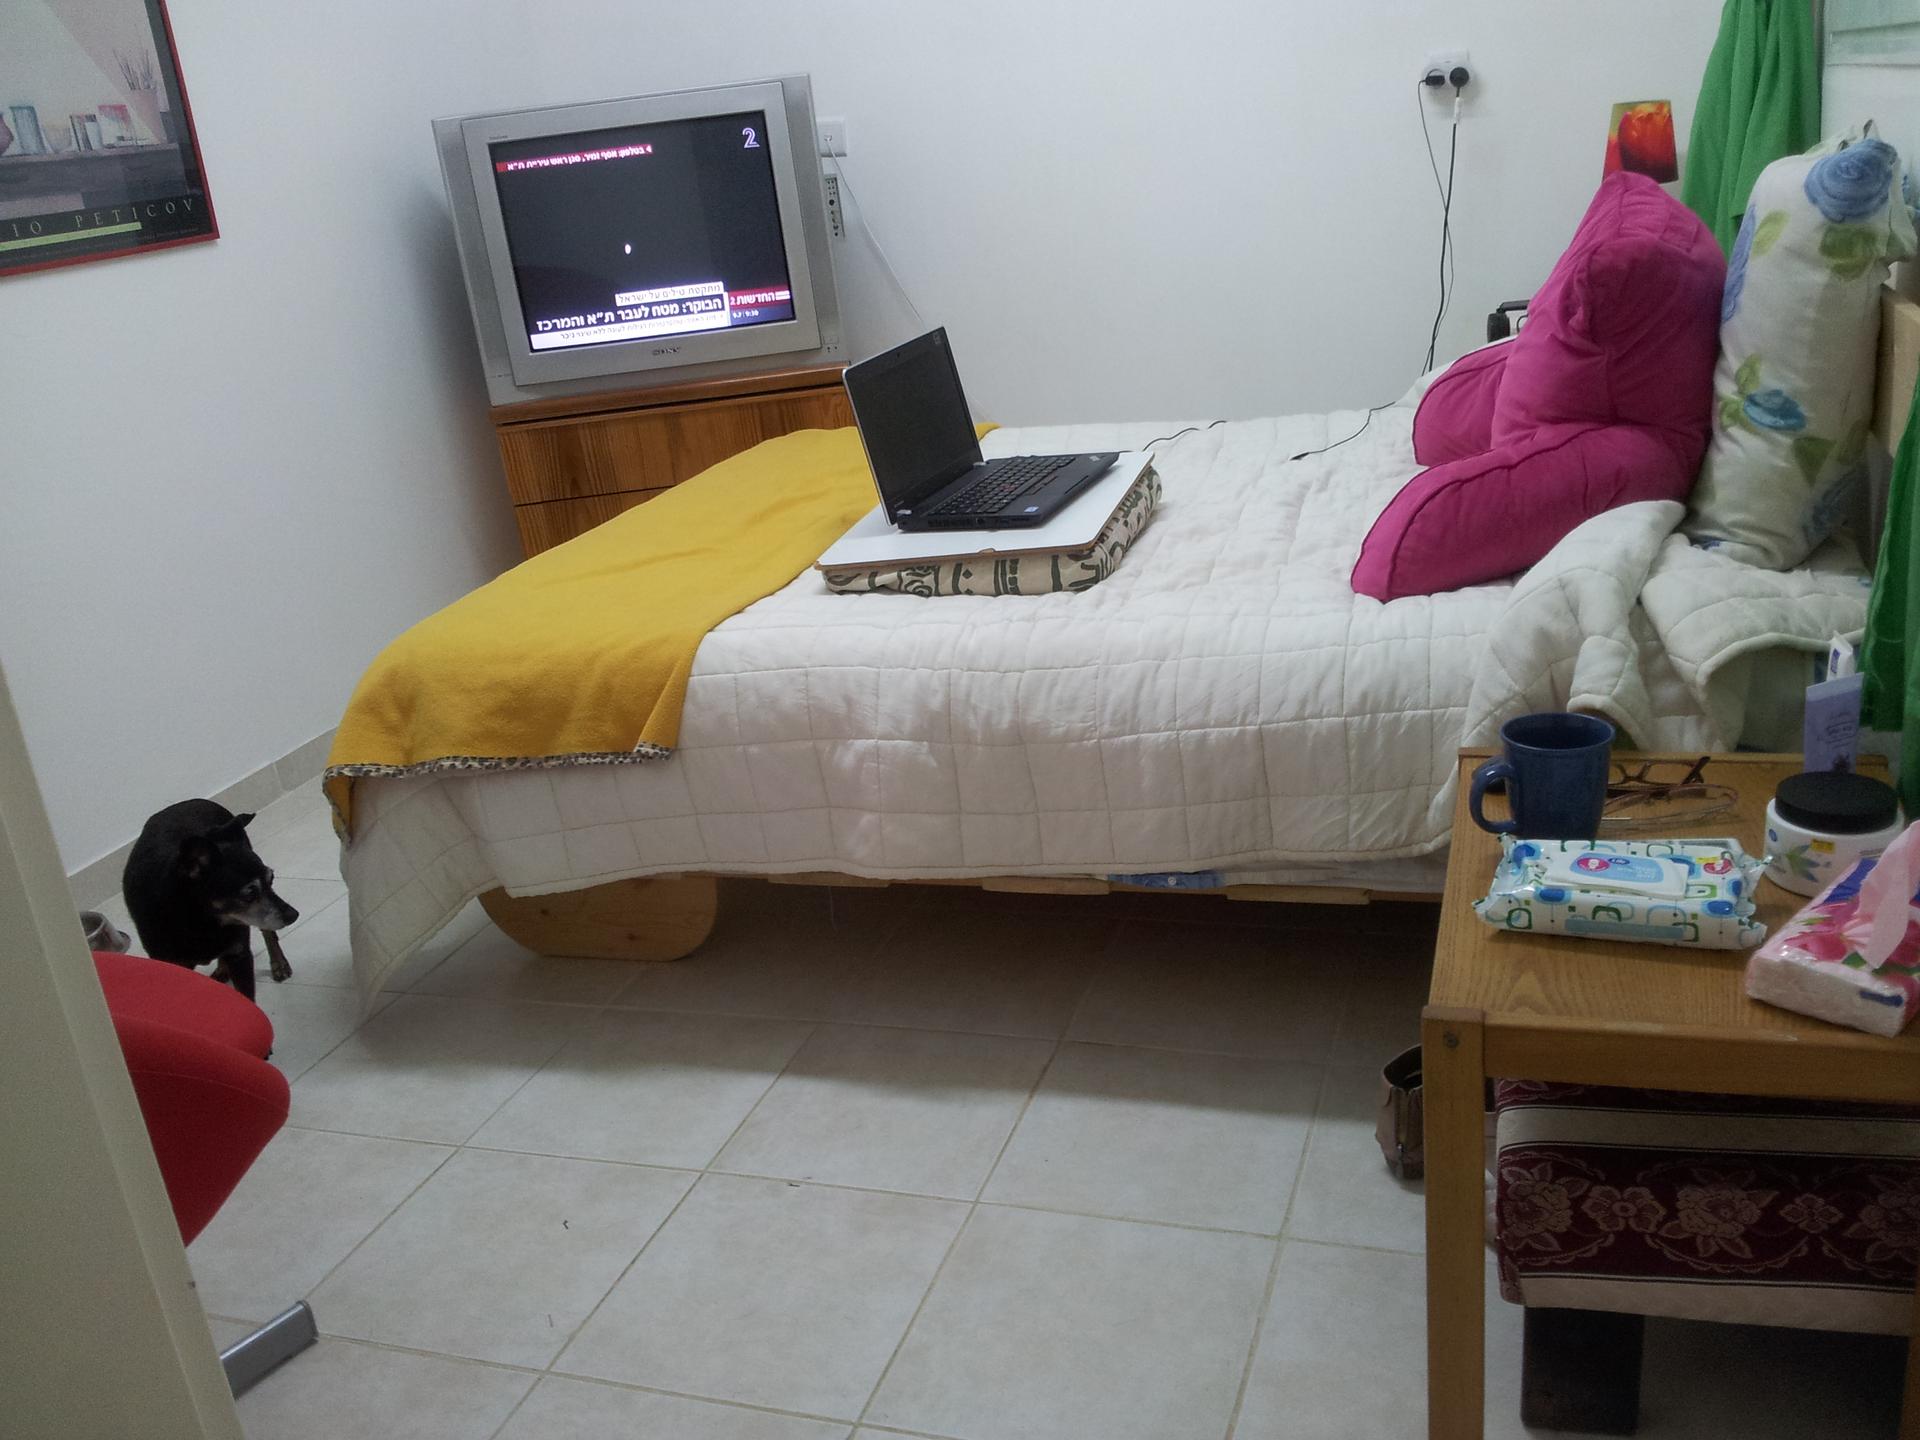 Adele Raemer's safe room in her home on a kibbutz in Nirim on Israel's border with Gaza.  